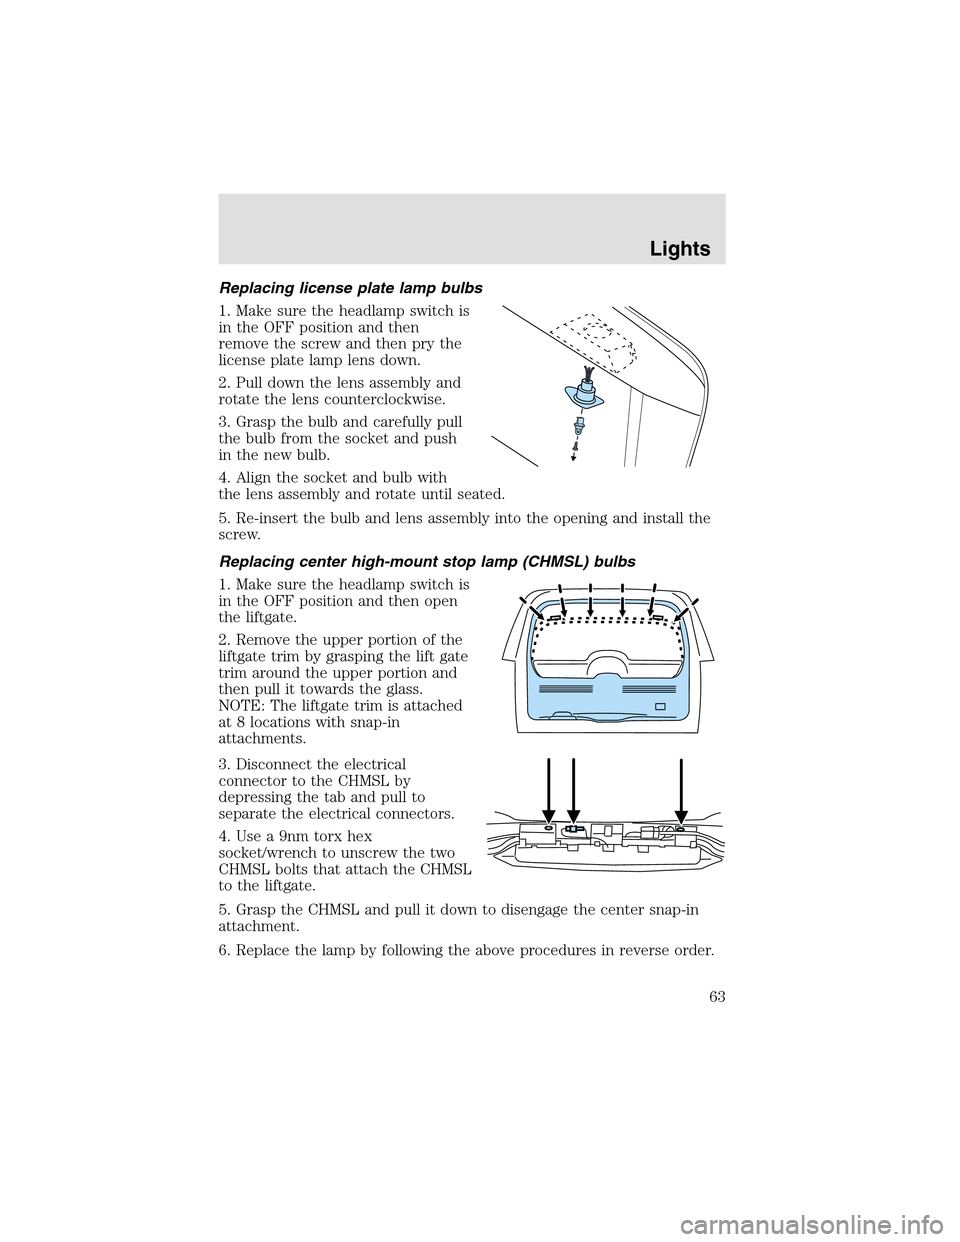 LINCOLN AVIATOR 2003 Repair Manual Replacing license plate lamp bulbs
1. Make sure the headlampswitch is
in the OFF position and then
remove the screw and then pry the
license plate lamp lens down.
2. Pull down the lens assembly and
ro